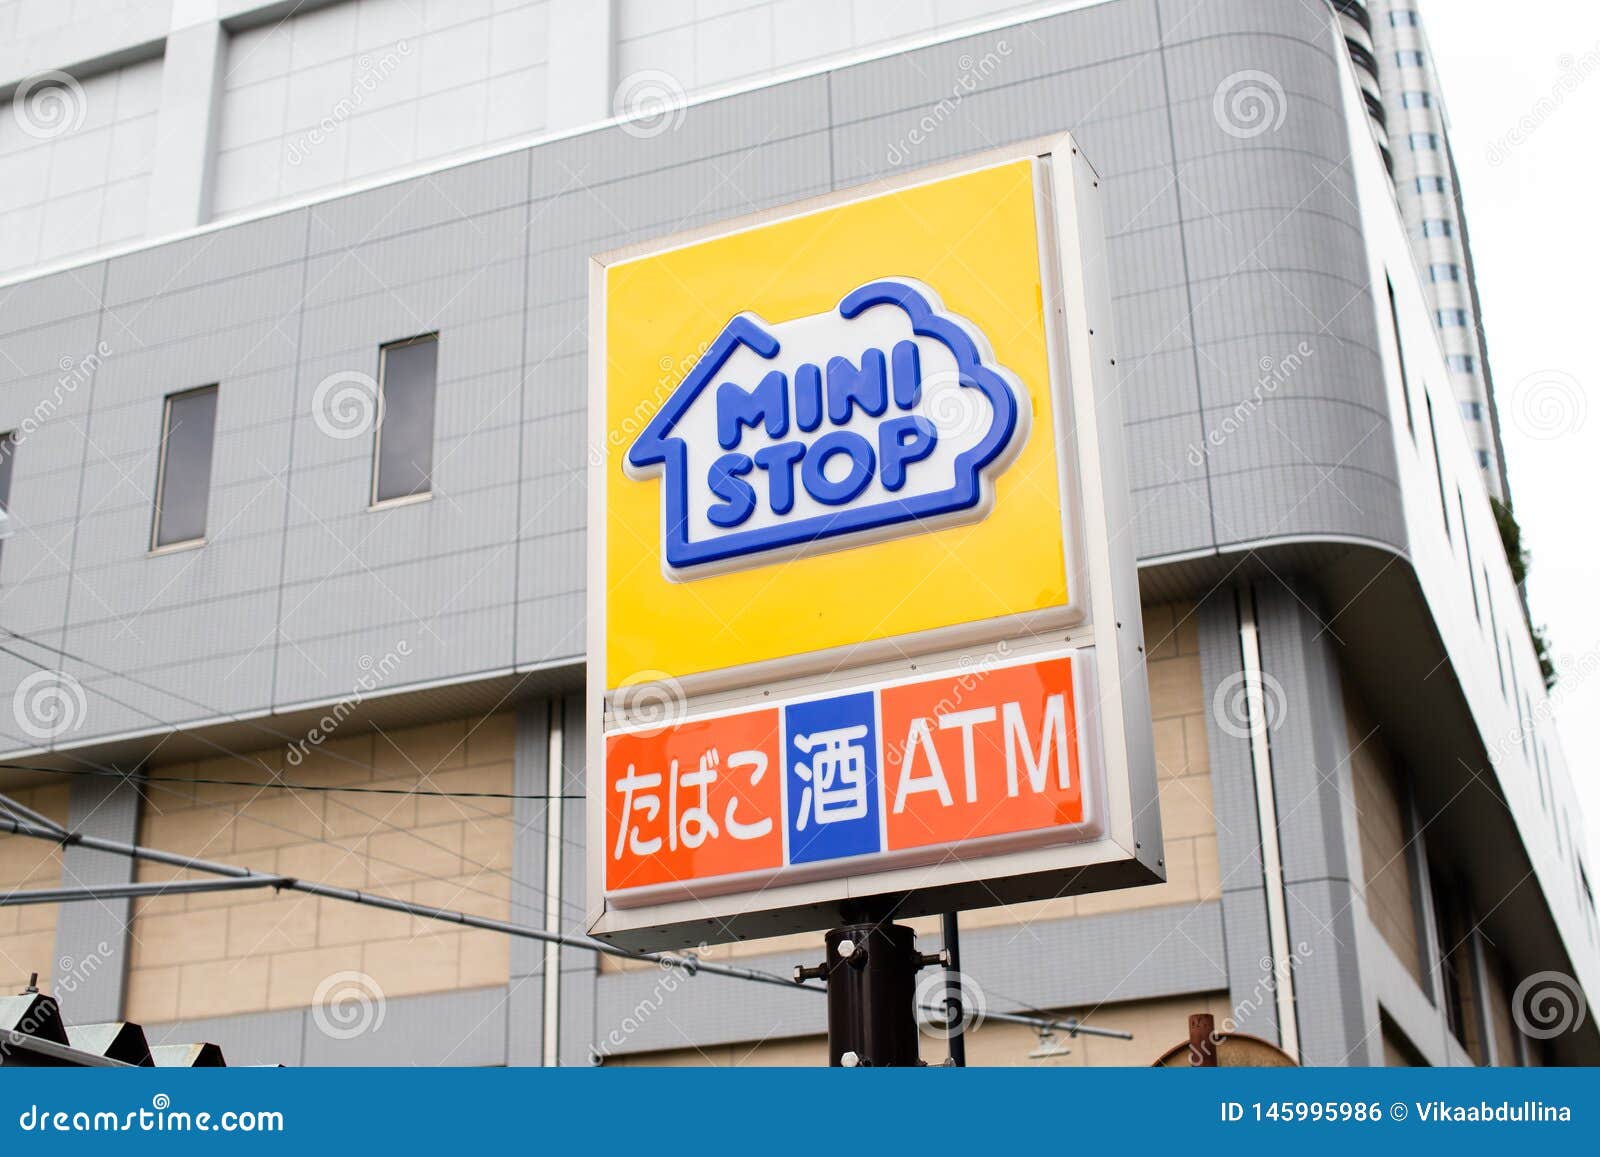 Ministop Co Ltd A Member Of Aeon Aeon Operates The Ministop Convenience Store Combin Editorial Photo Image Of Famous Brand